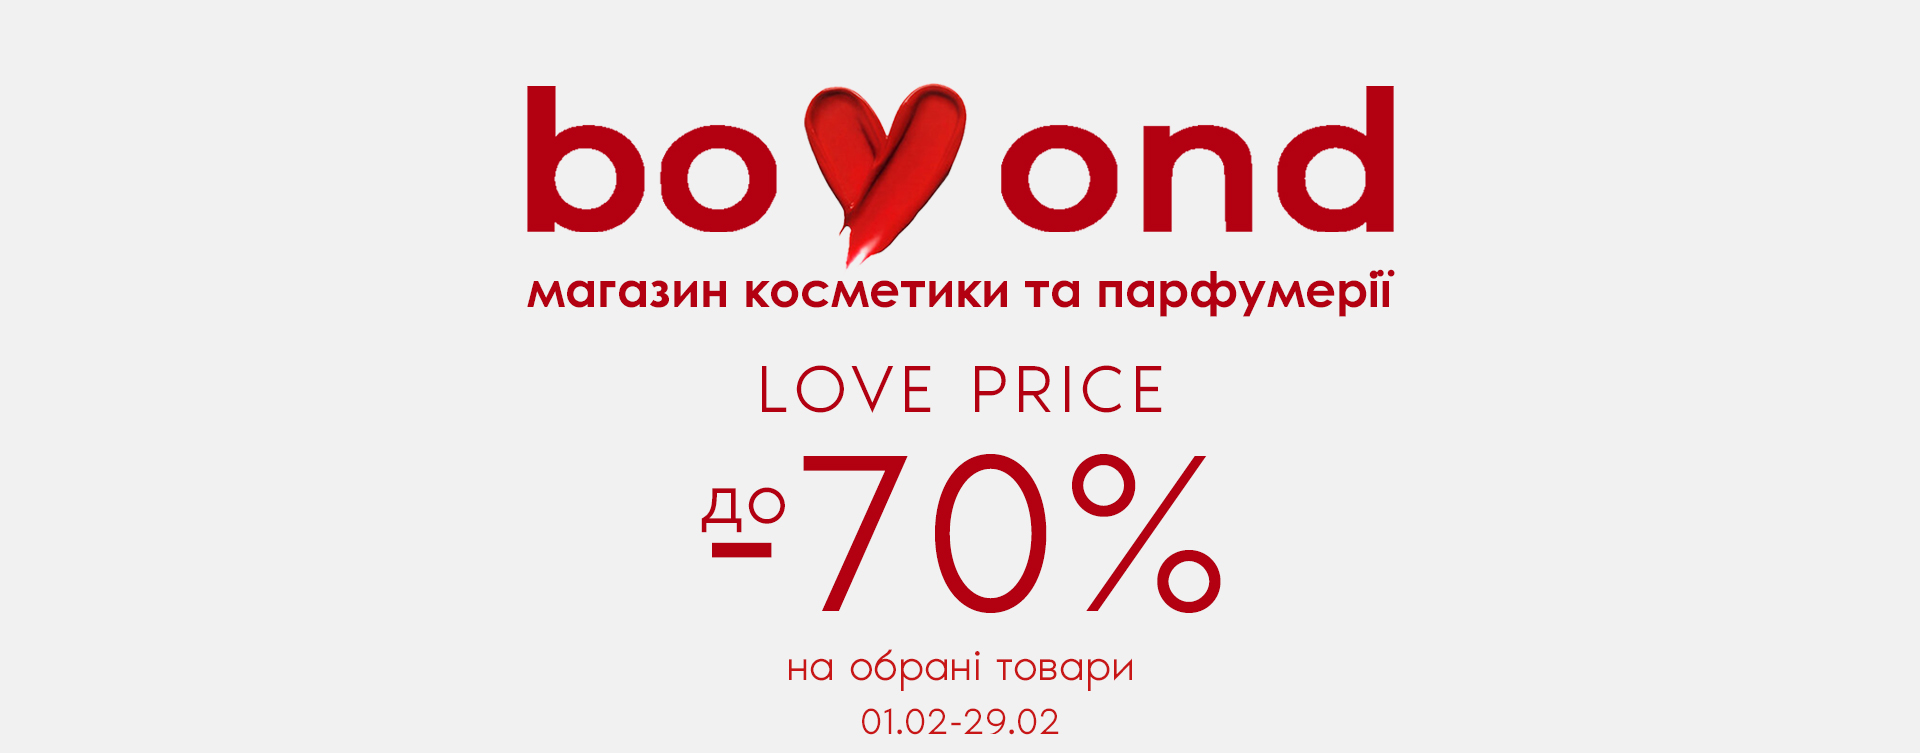 LOVE Price Bomond with discounts up to -70%